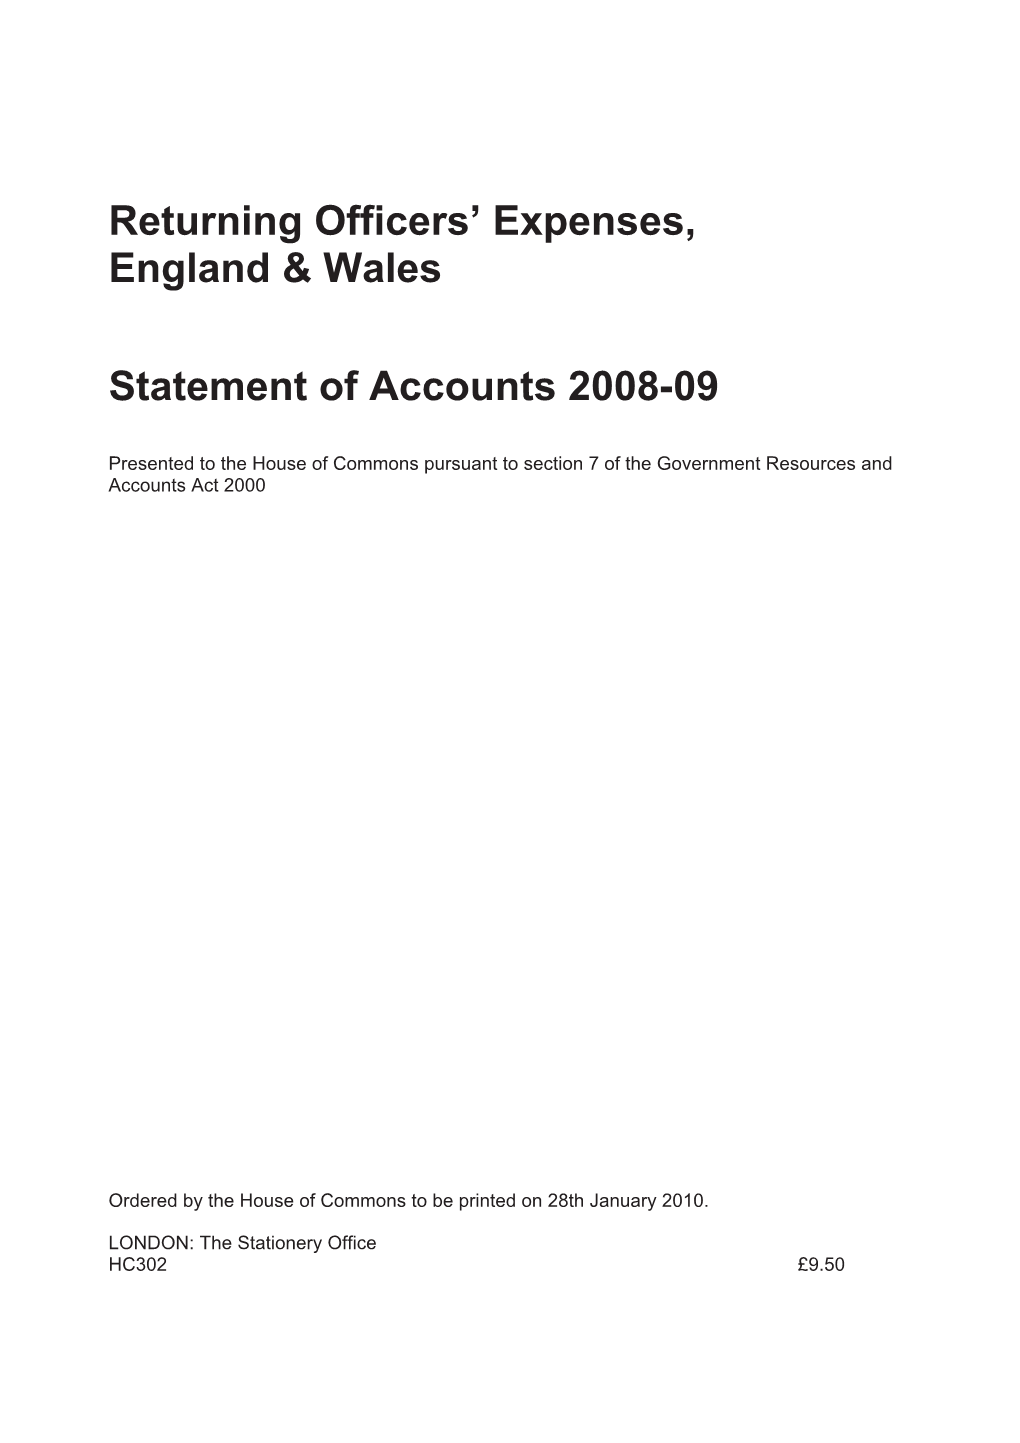 Returning Officers' Expenses, England & Wales Statement of Accounts